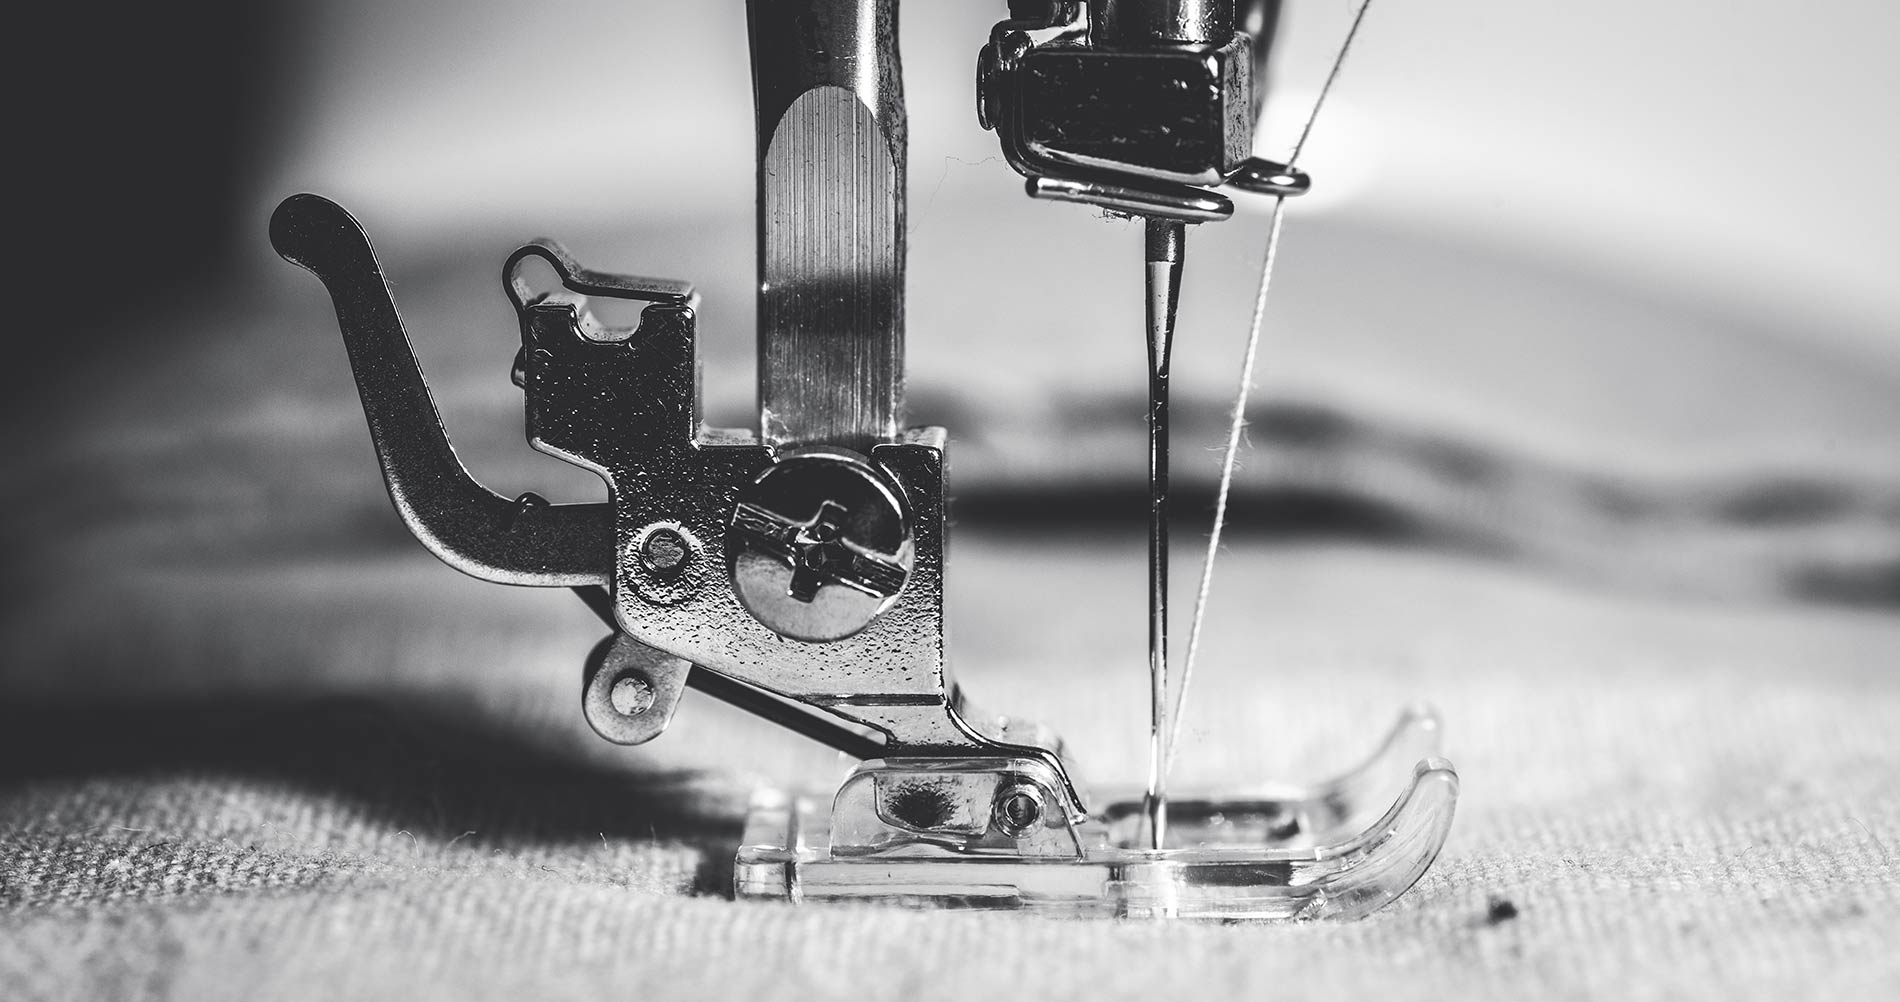 Sewing and Shoe Making Equipment